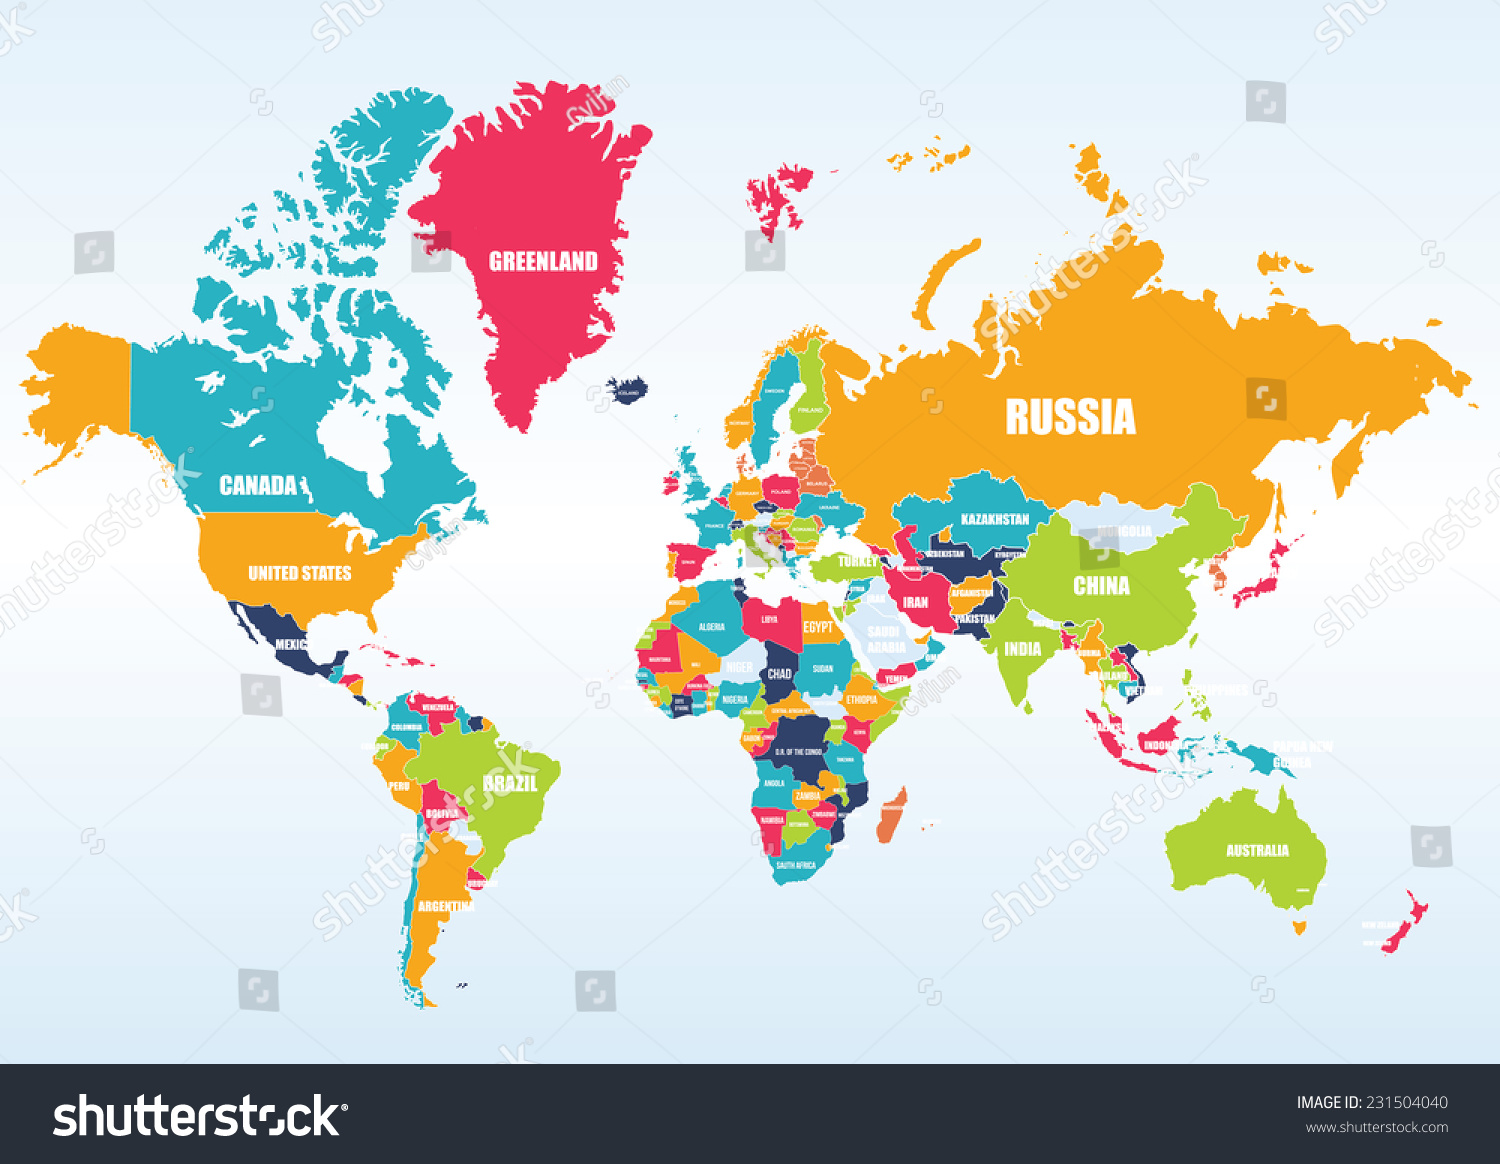 World map-countries #231504040